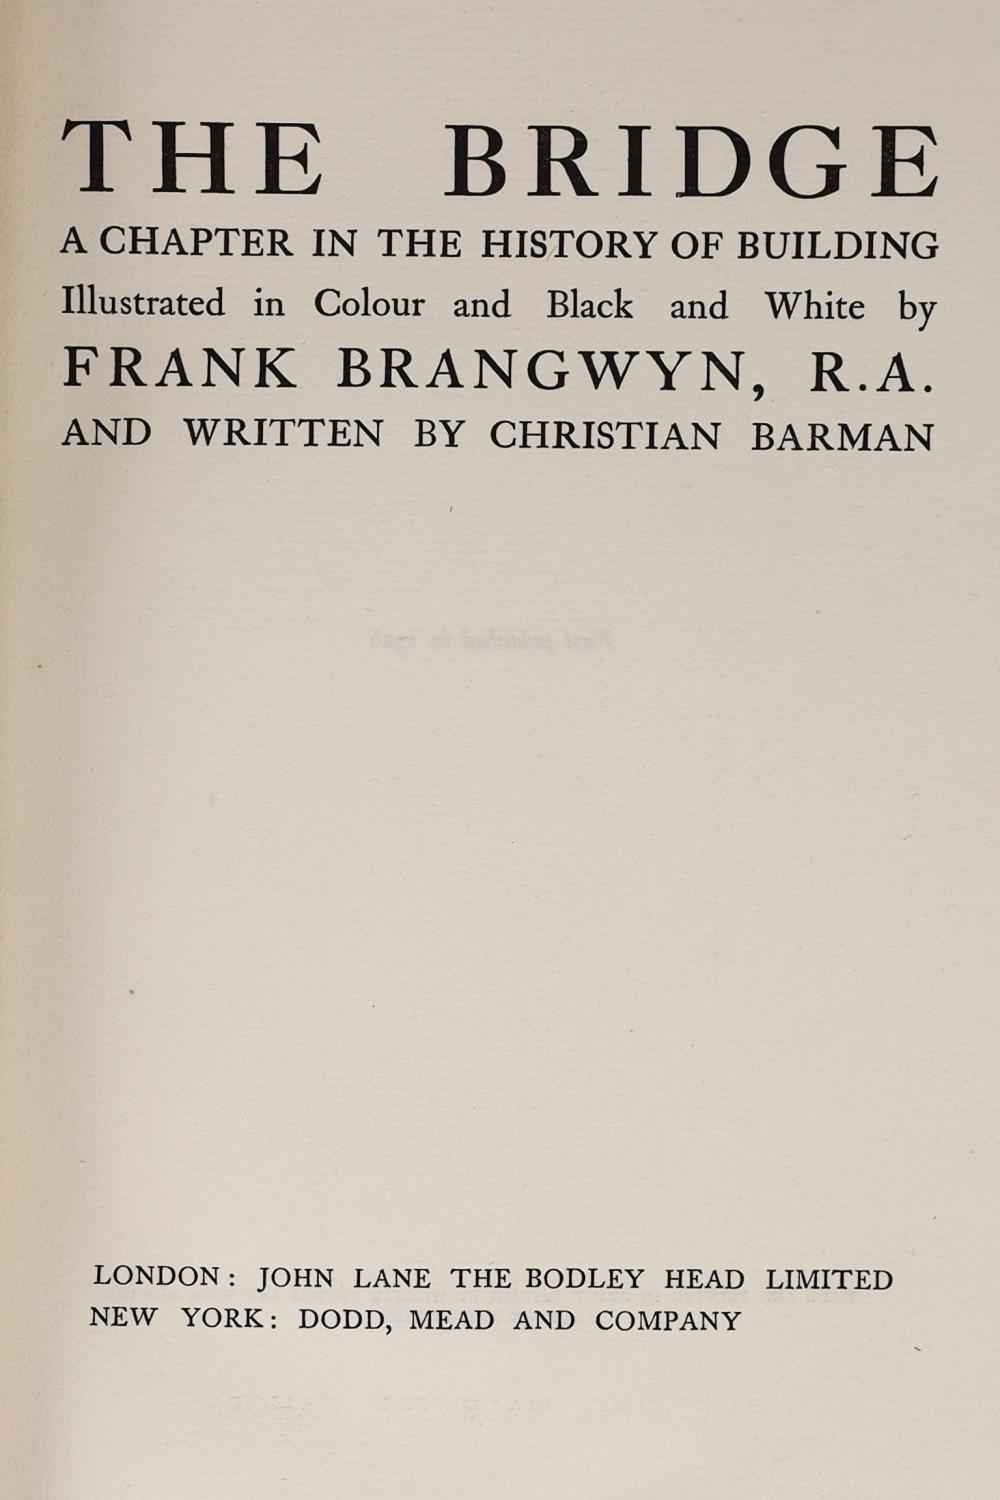 ° ° Barman, Christian - The Bridge, one of 125, illustrated by Frank Brangwyn, 4to, half cloth, with